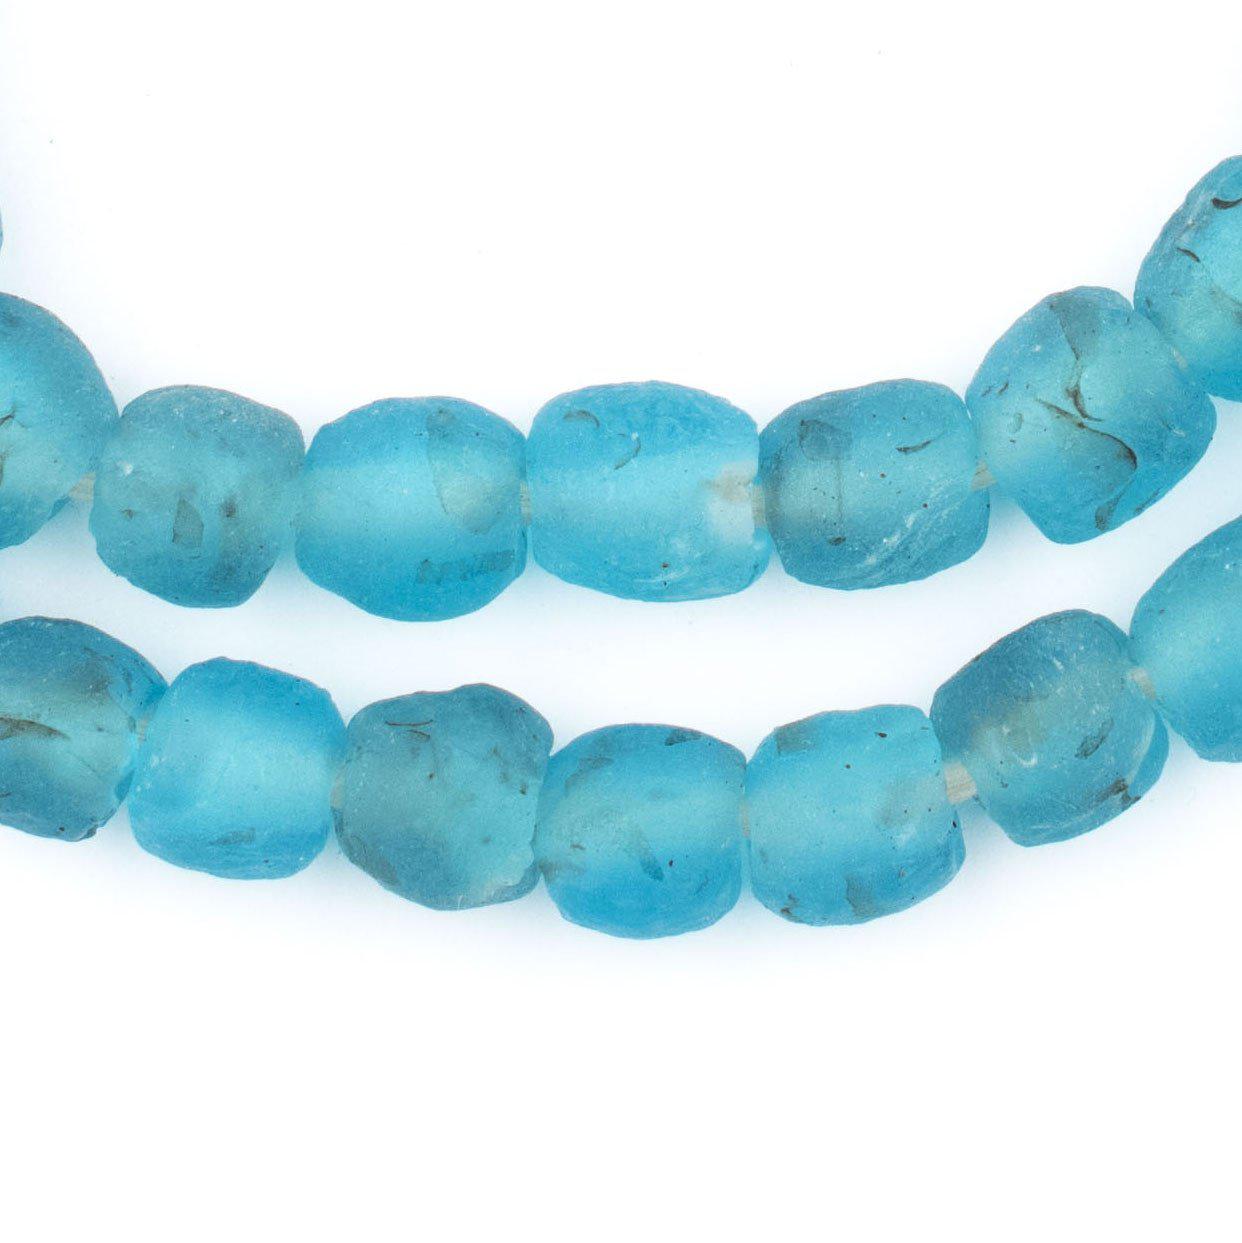 9mm Recycled Glass Beads